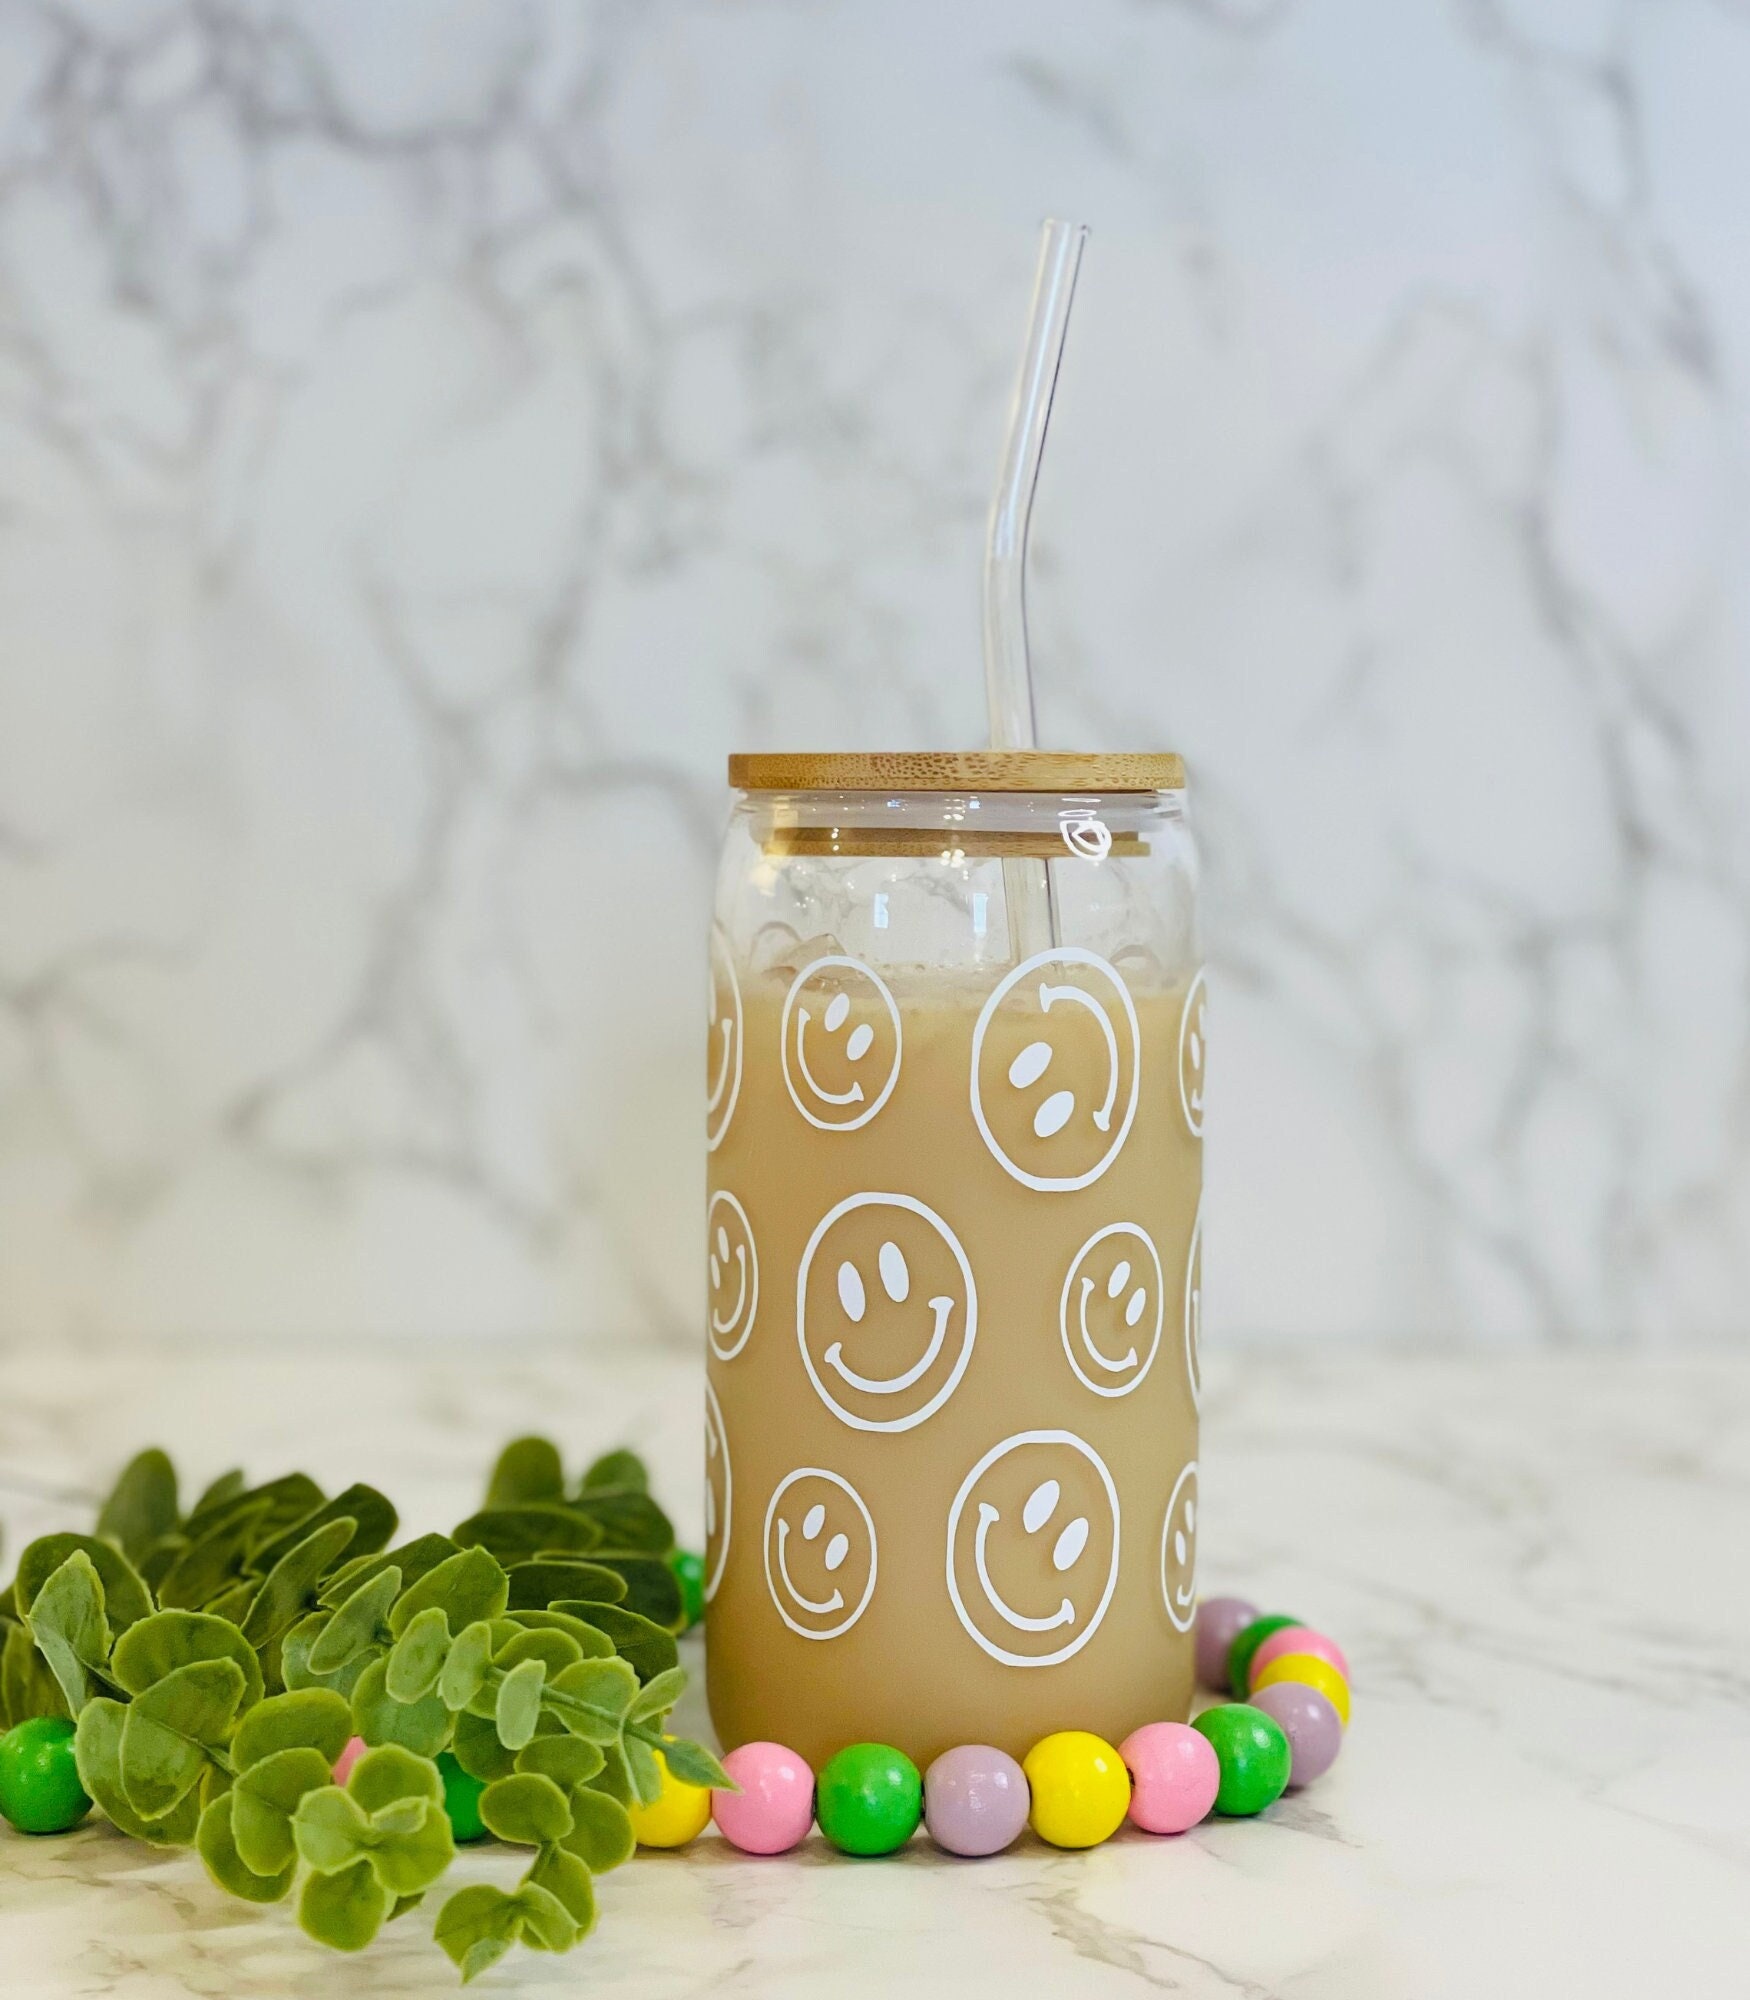 PASTEL HAPPY FACE TUMBLER CUP WITH DRINKING STRAW – Gi Gi's Boutique